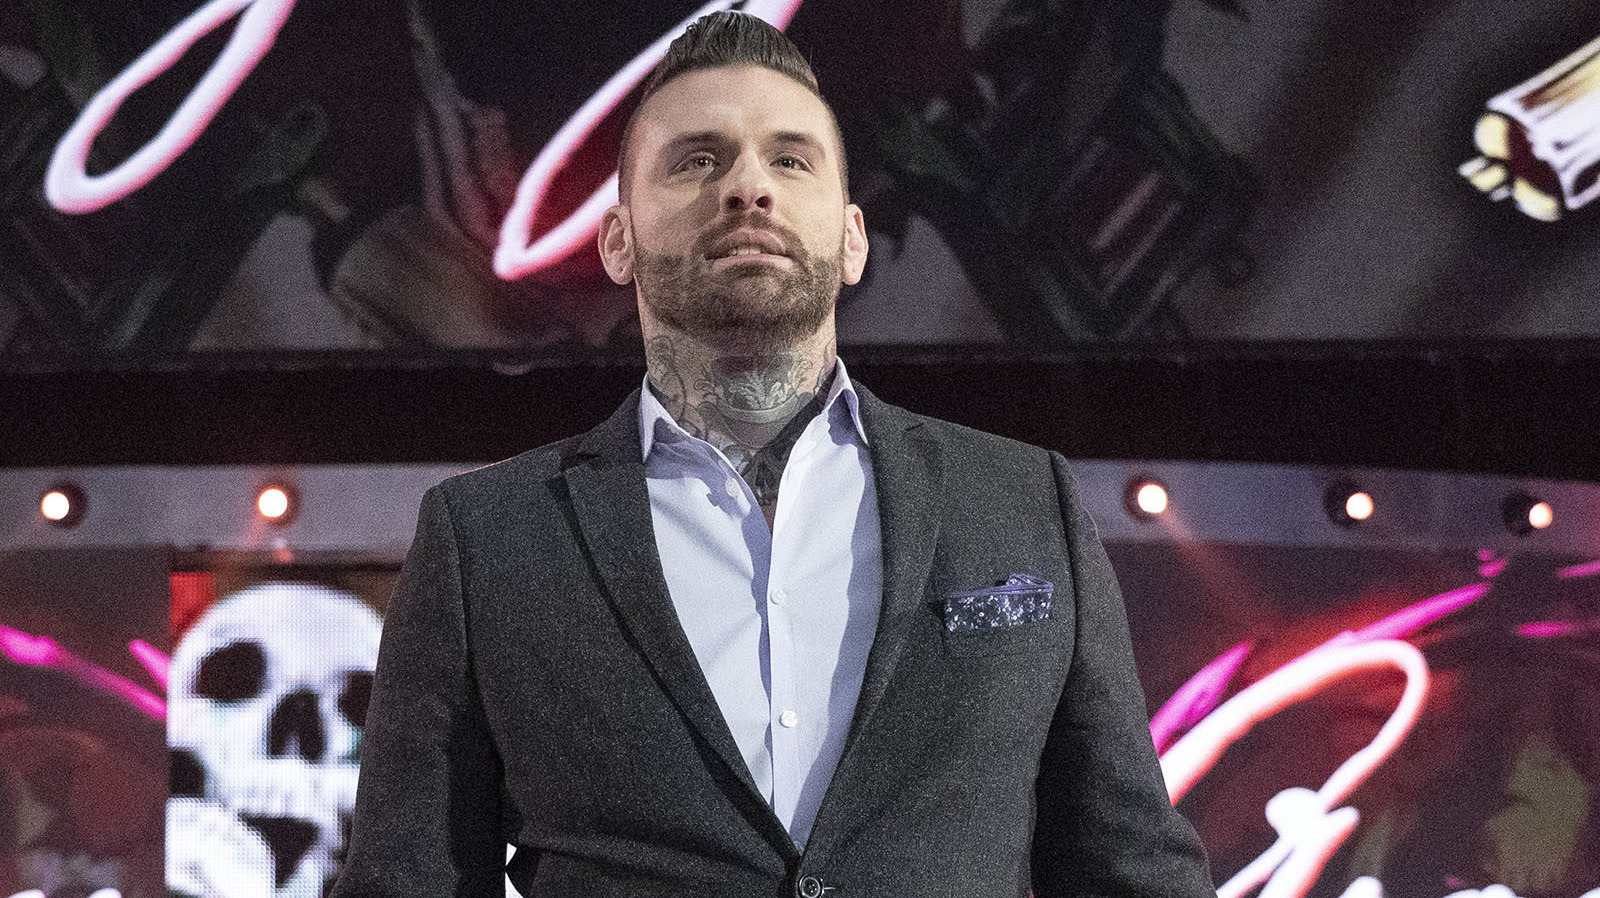 WWE Broadcaster Corey Graves Discusses Transition To SmackDown